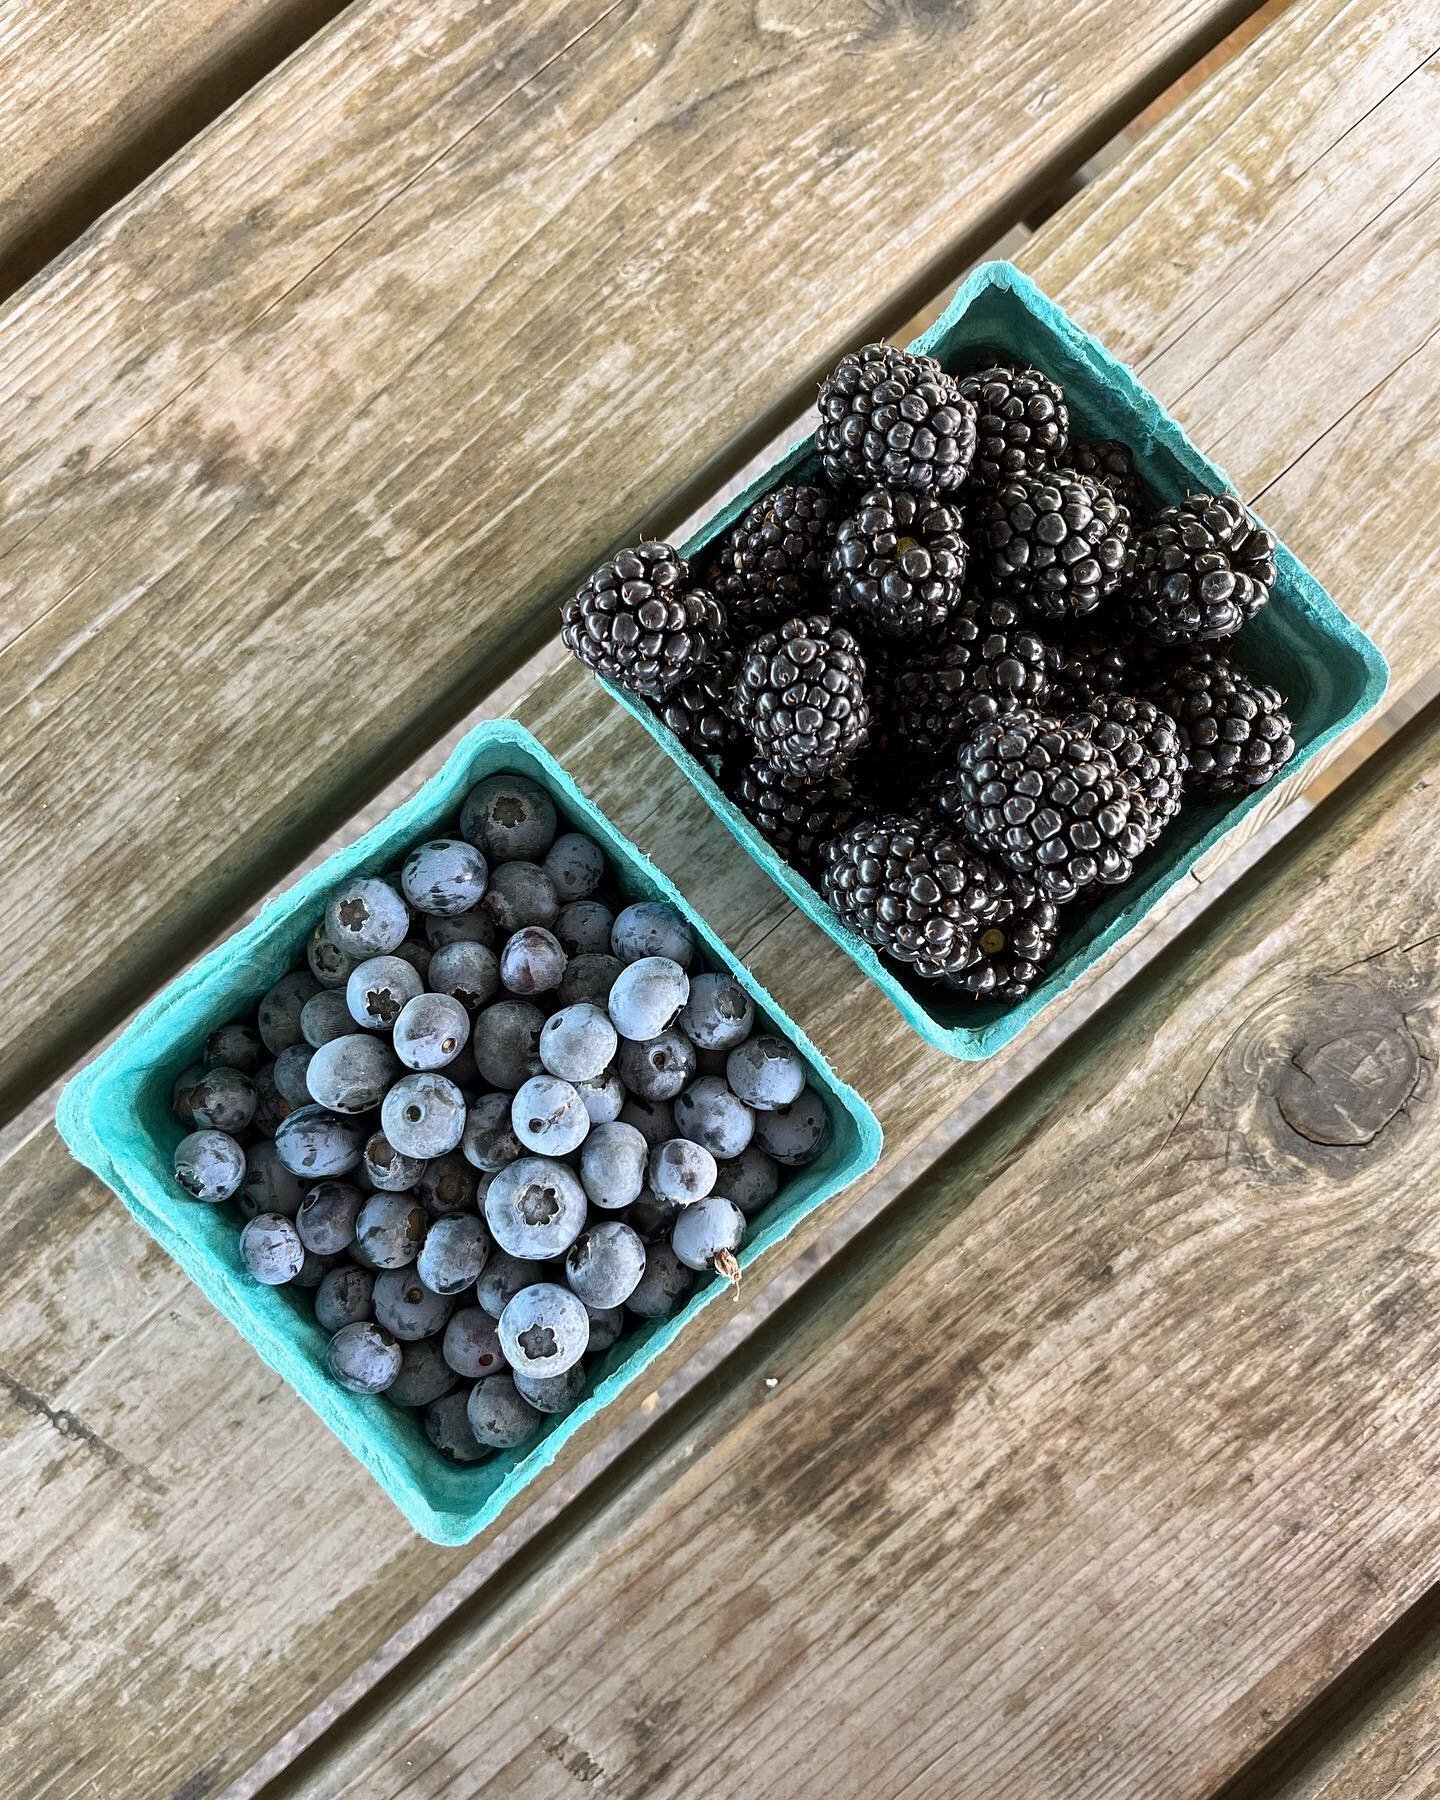 It&rsquo;s a blueberry and blackberry weekend! Come visit us before this summer slips away ☀️

U-pick berries this weekend:
✨Blueberries: SO. MANY. Come pick them! Both fields look great and varieties include Legacy, Chandler, Top Shelf, and Calypso.